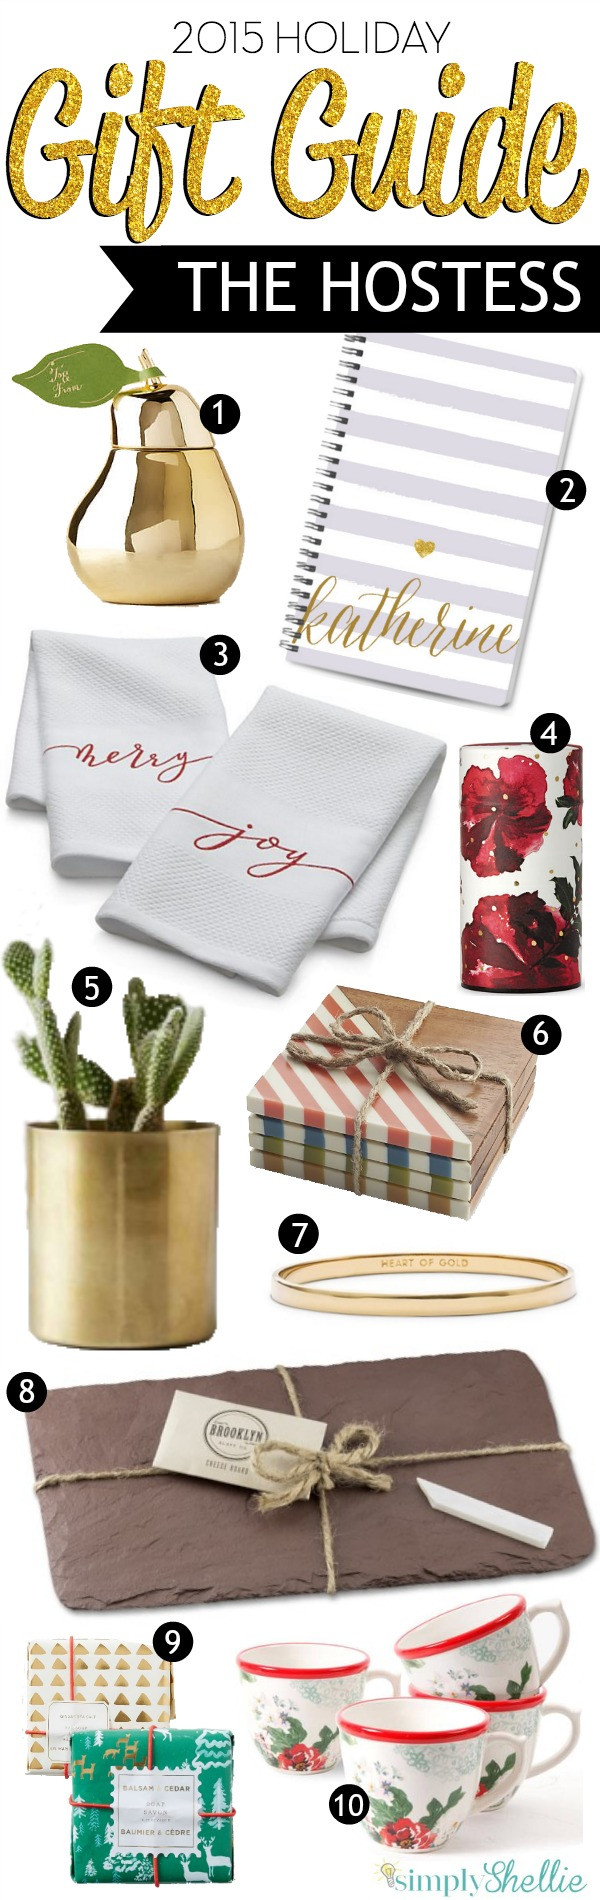 Hostess Gift Ideas For Holiday Party
 Holiday Gift Guide Fabulous Hostess Gift Ideas